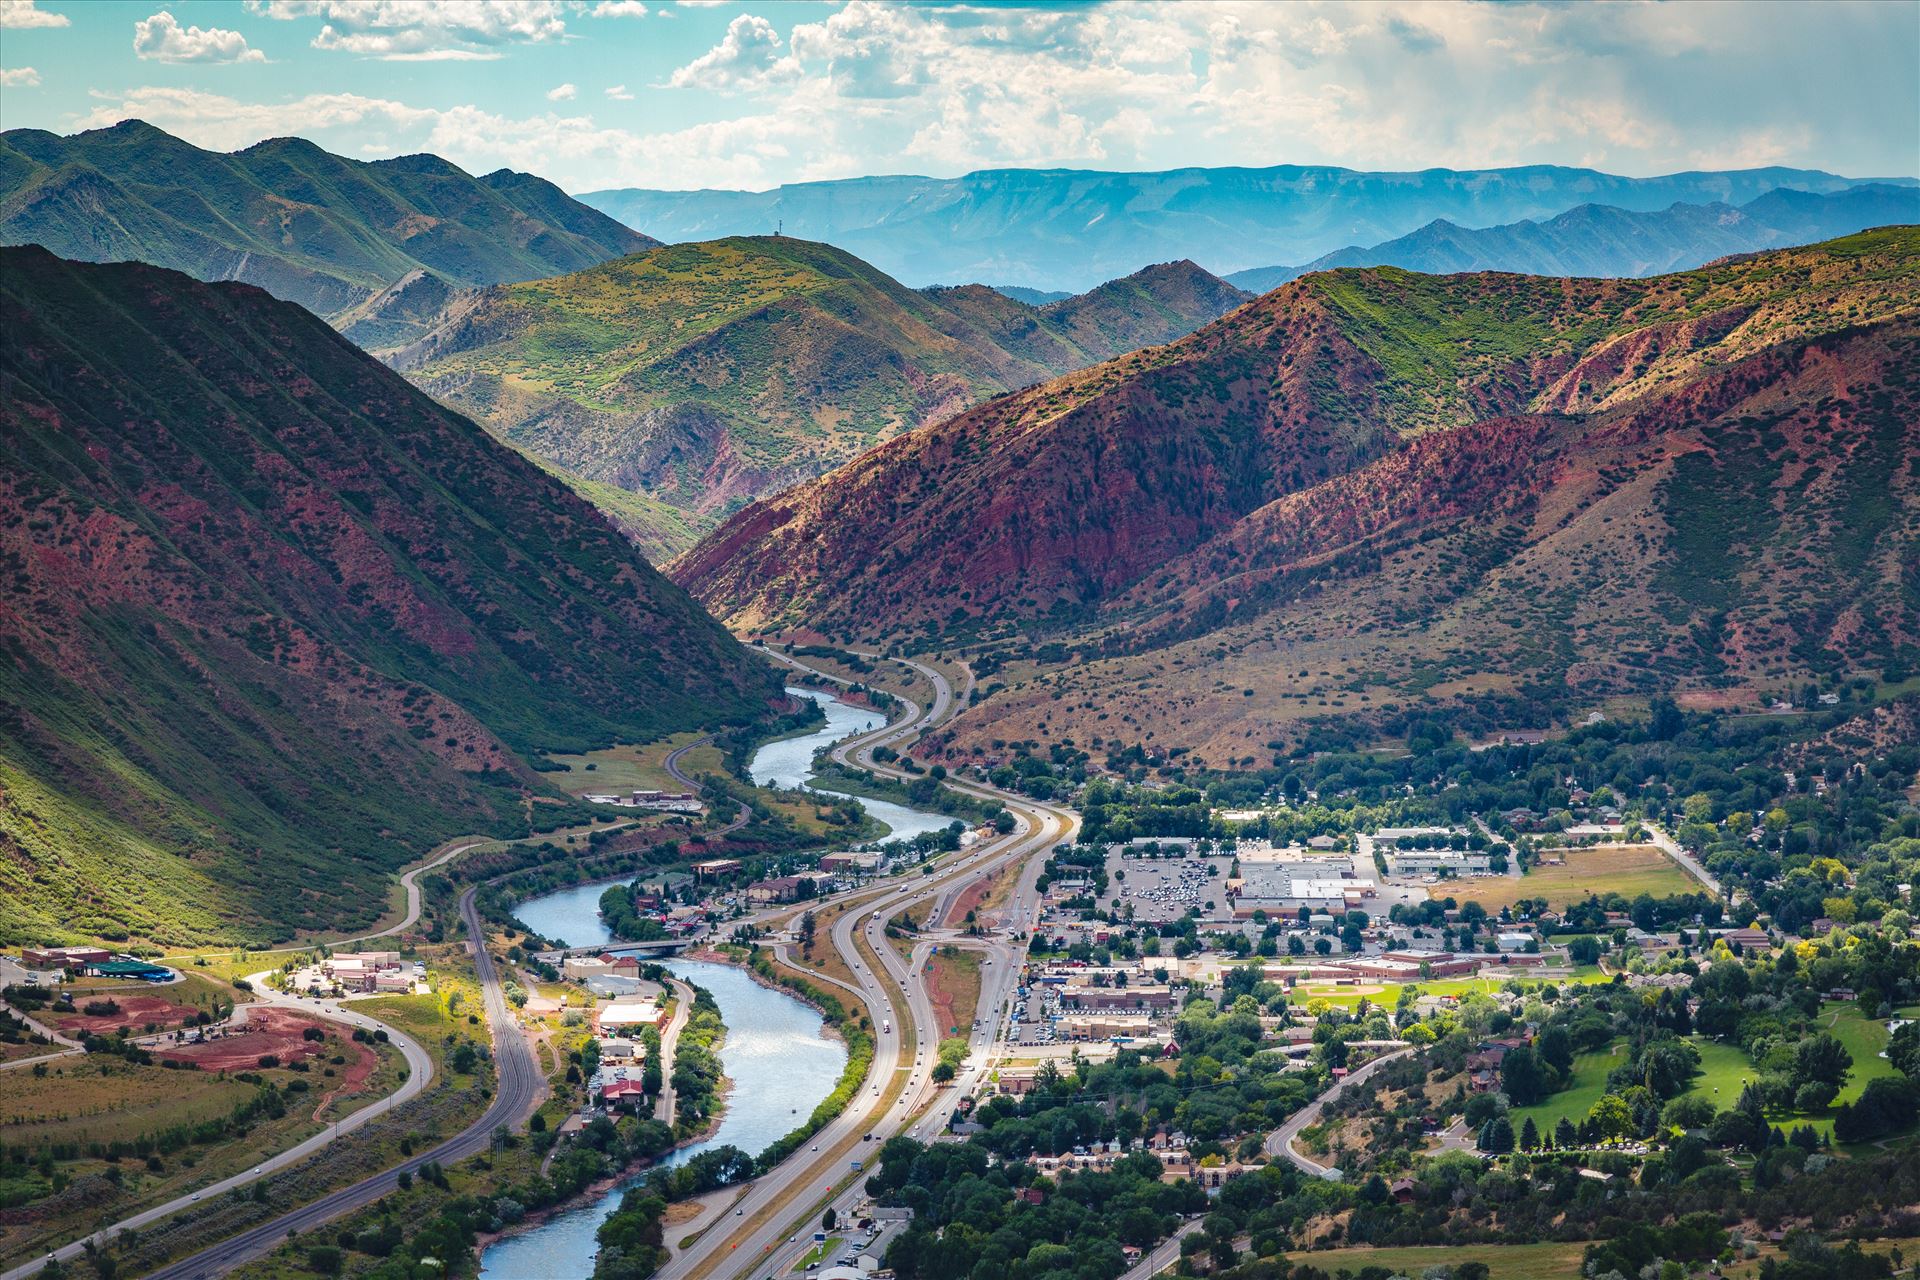 Glenwood Springs from Glenwood Caverns No 2 - Landscape version of the view from the top of Glenwood Caverns, the city of Glenwood Springs, Colorado looks miniature. by Scott Smith Photos